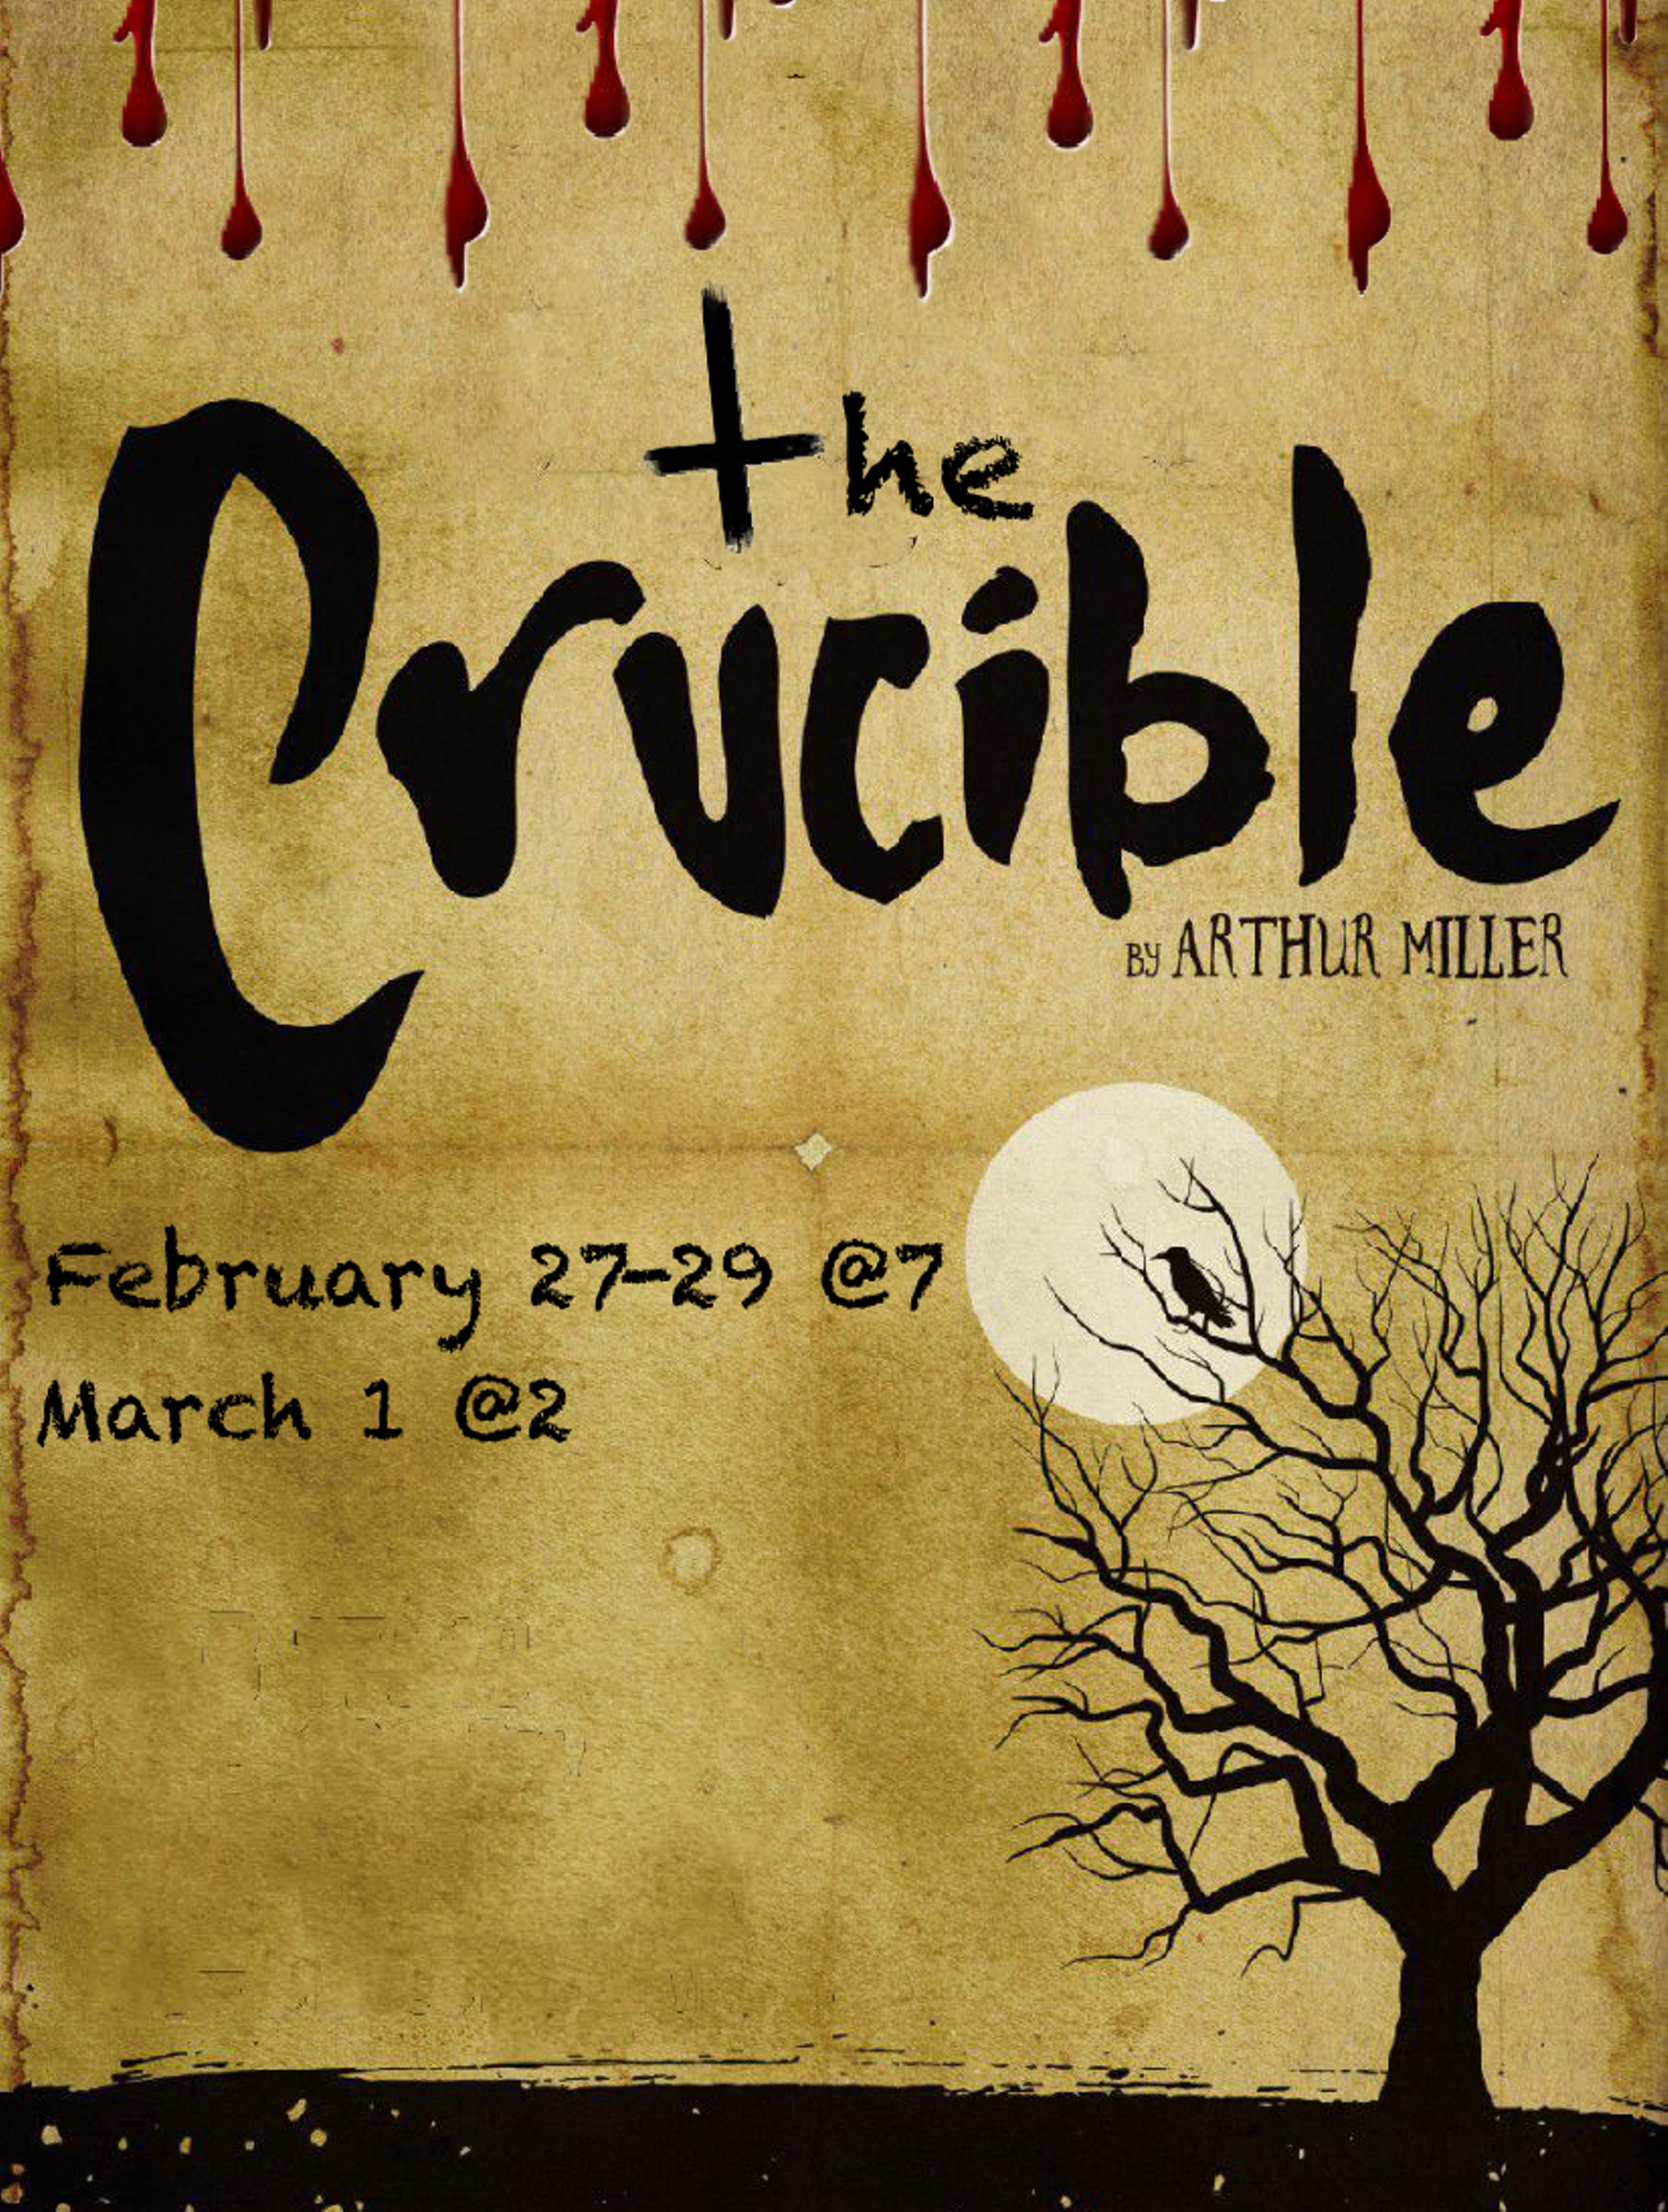 the crucible play poster